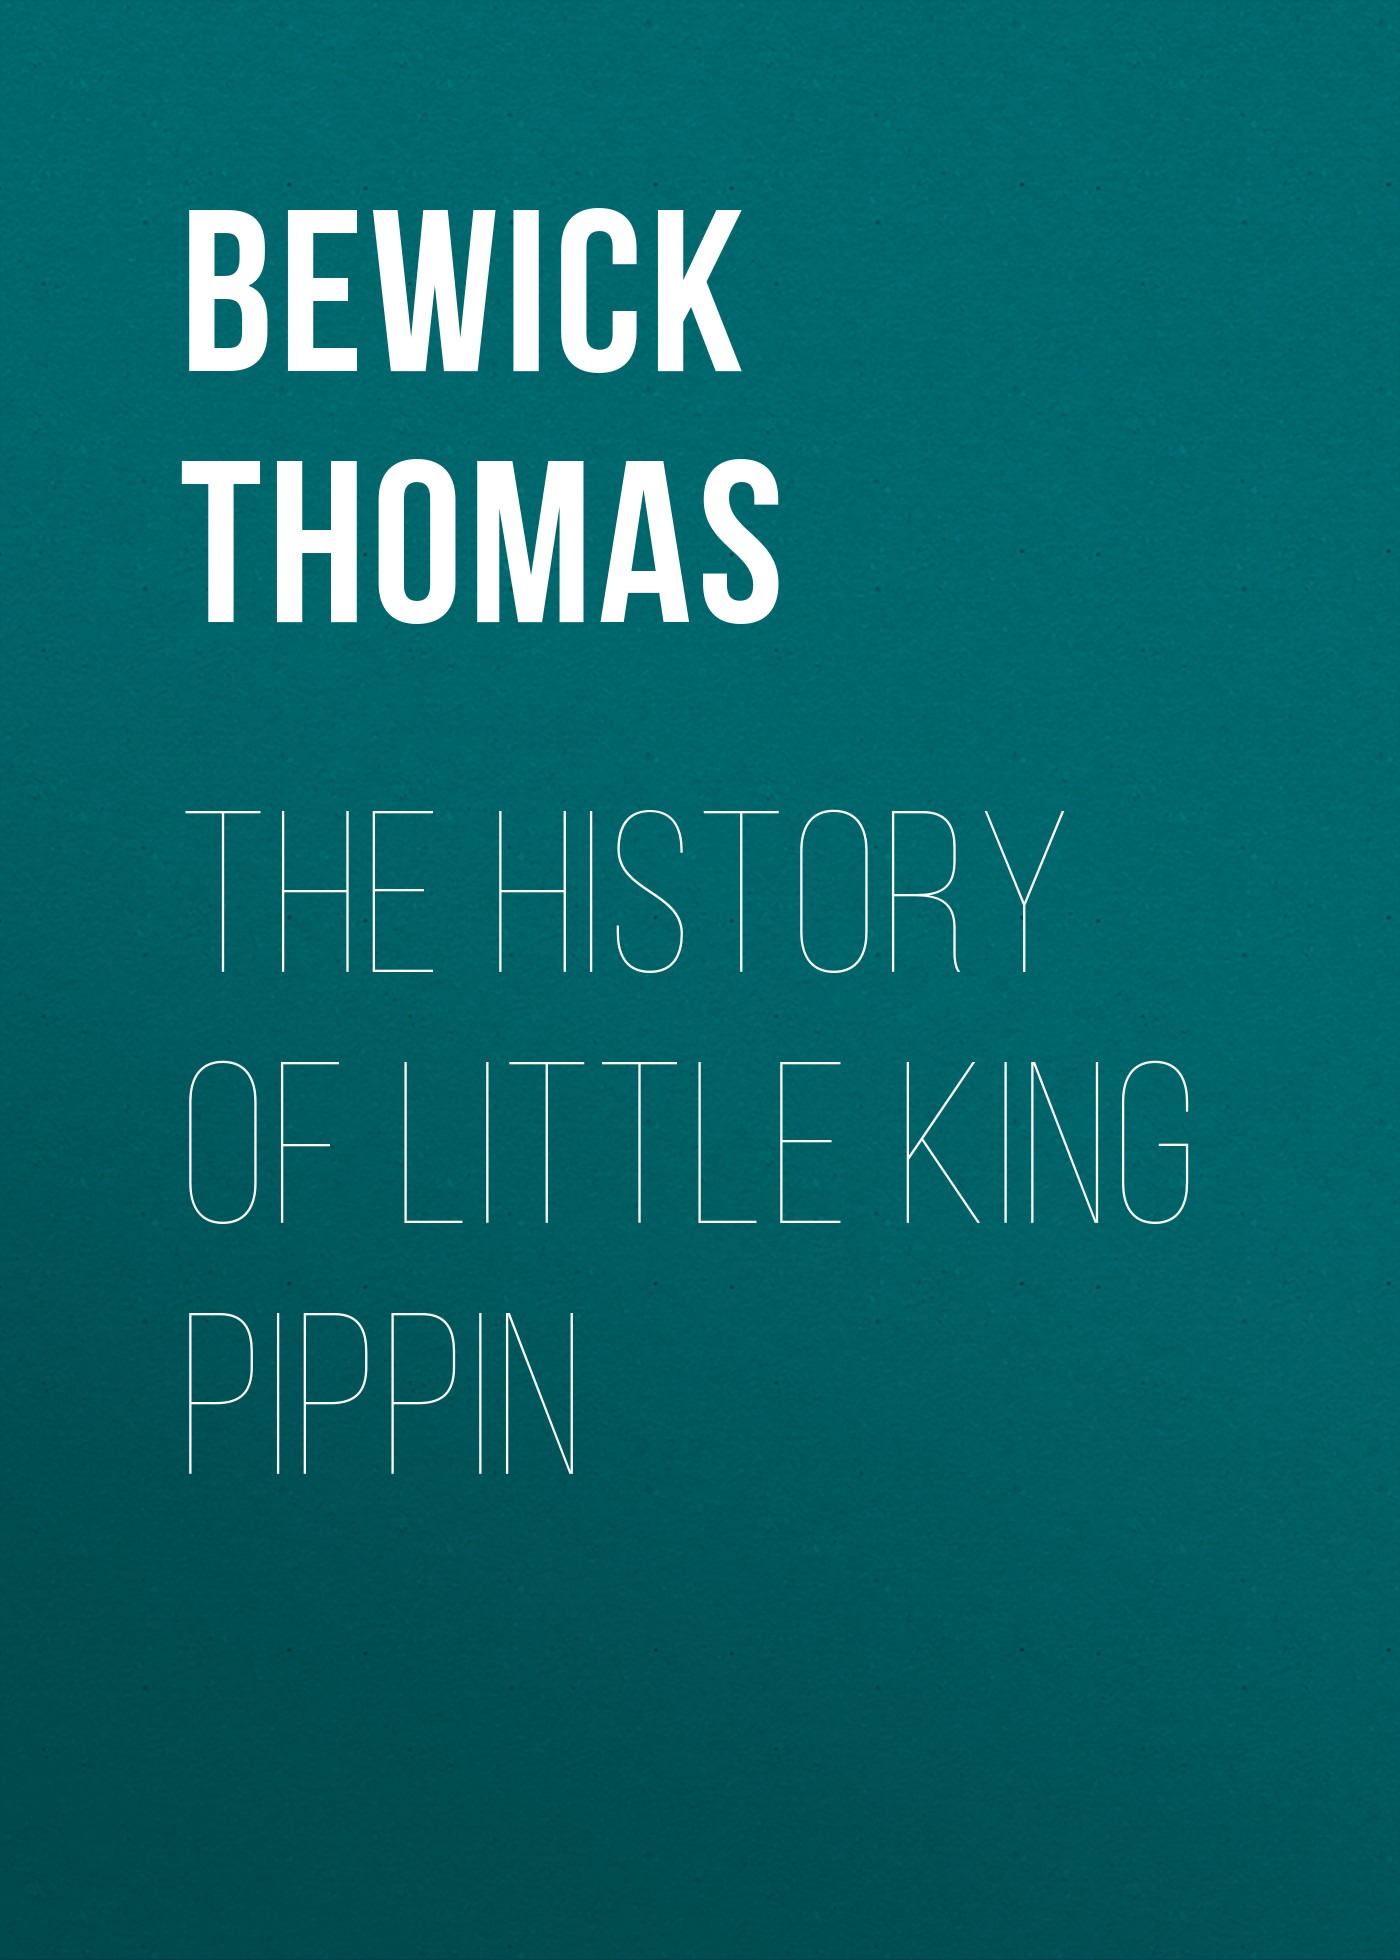 Bewick Thomas The History of Little King Pippin